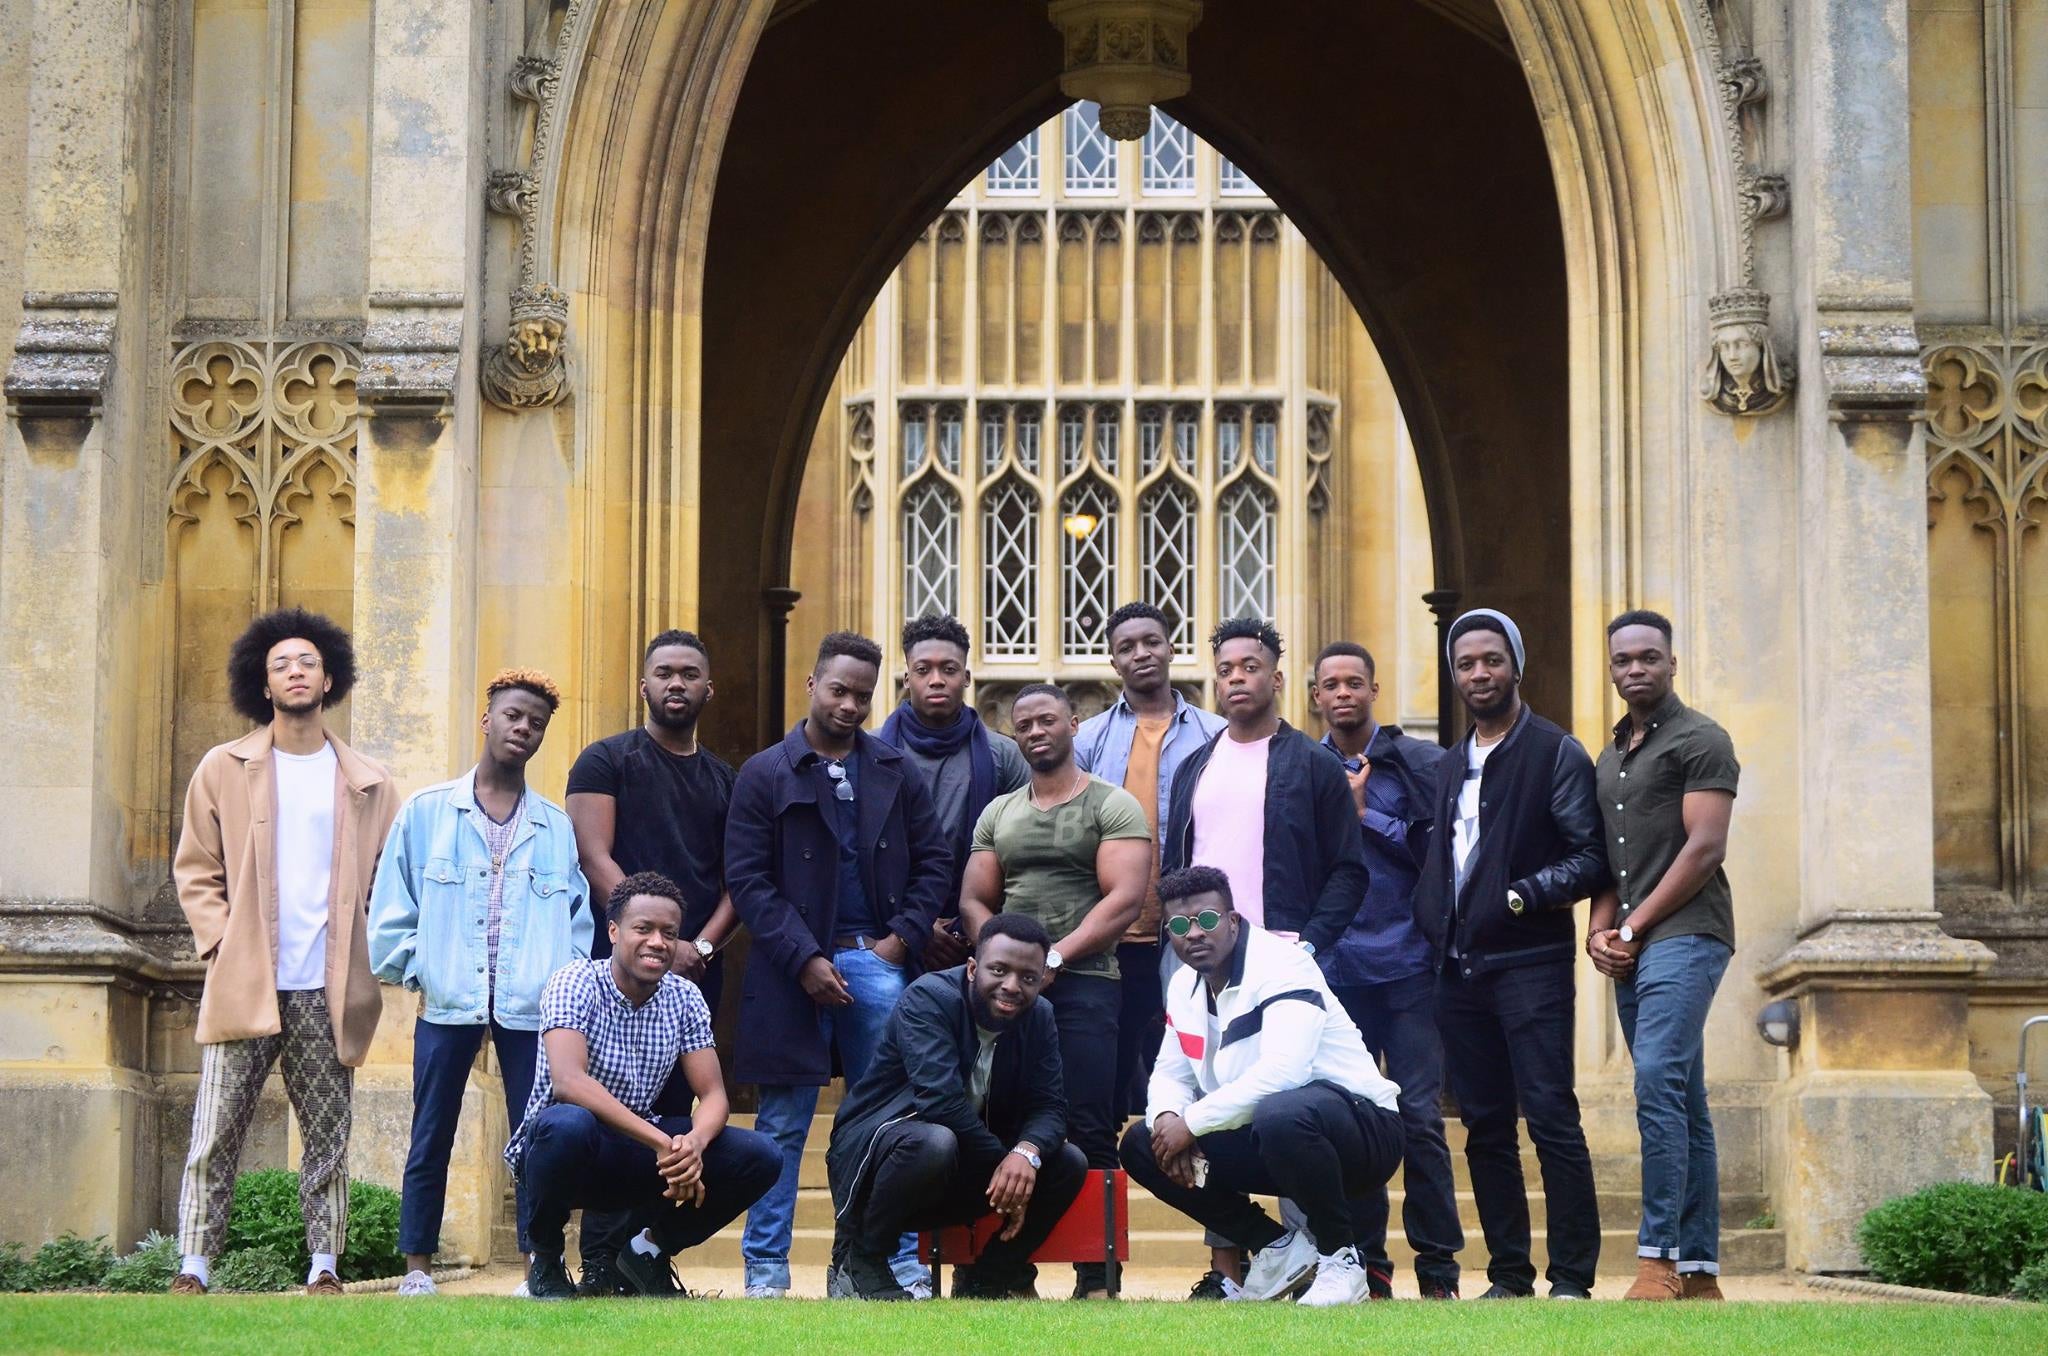 These Photos Of Black Men At Cambridge University Have People Concerned About Diversity